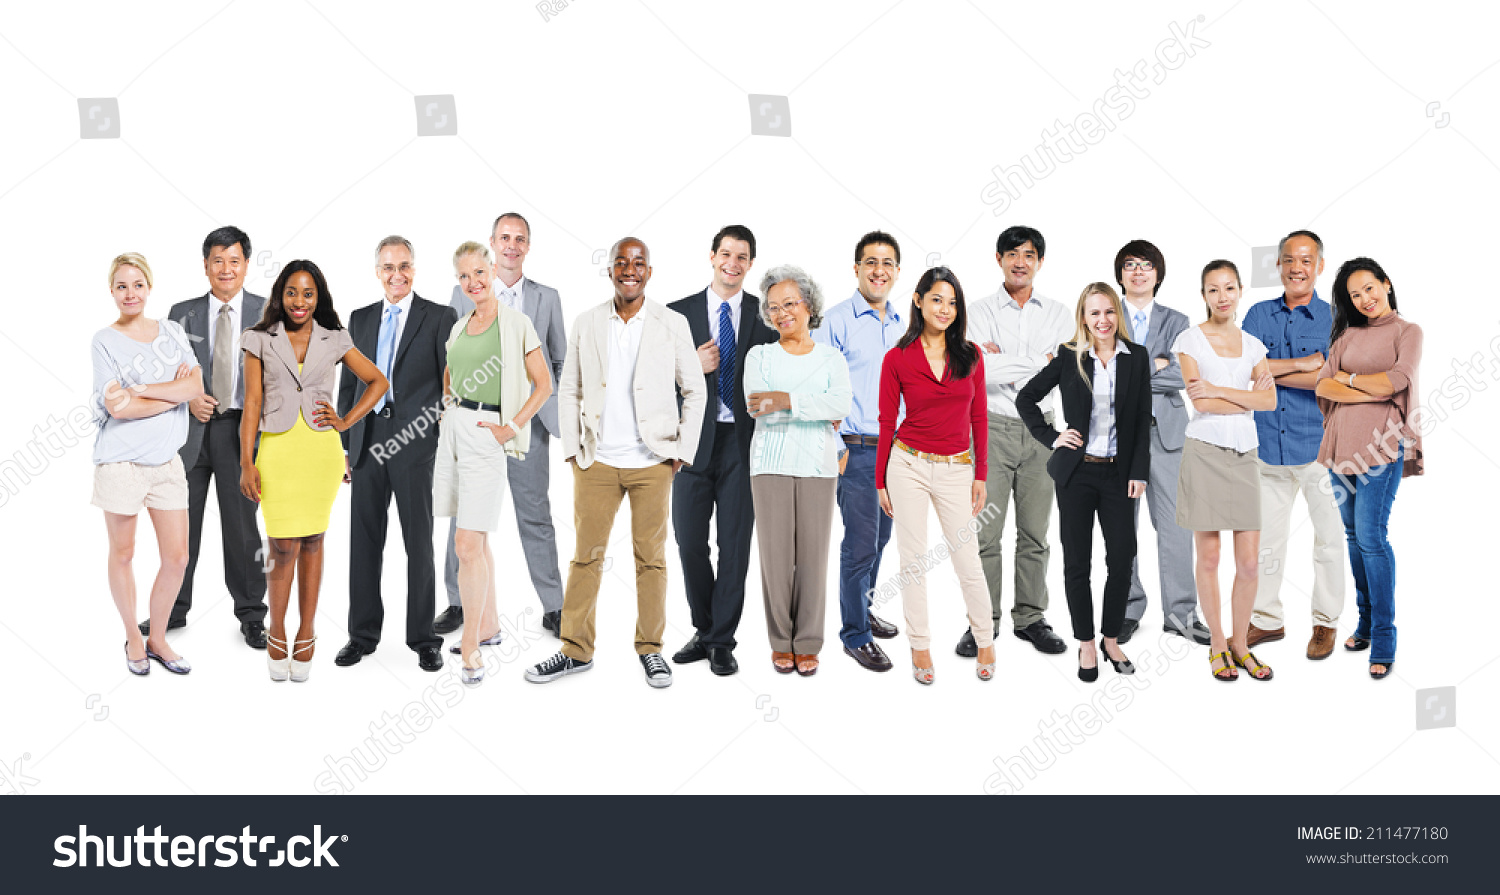 Group of multi-ethnic and diverse occupational people in a white background. #211477180